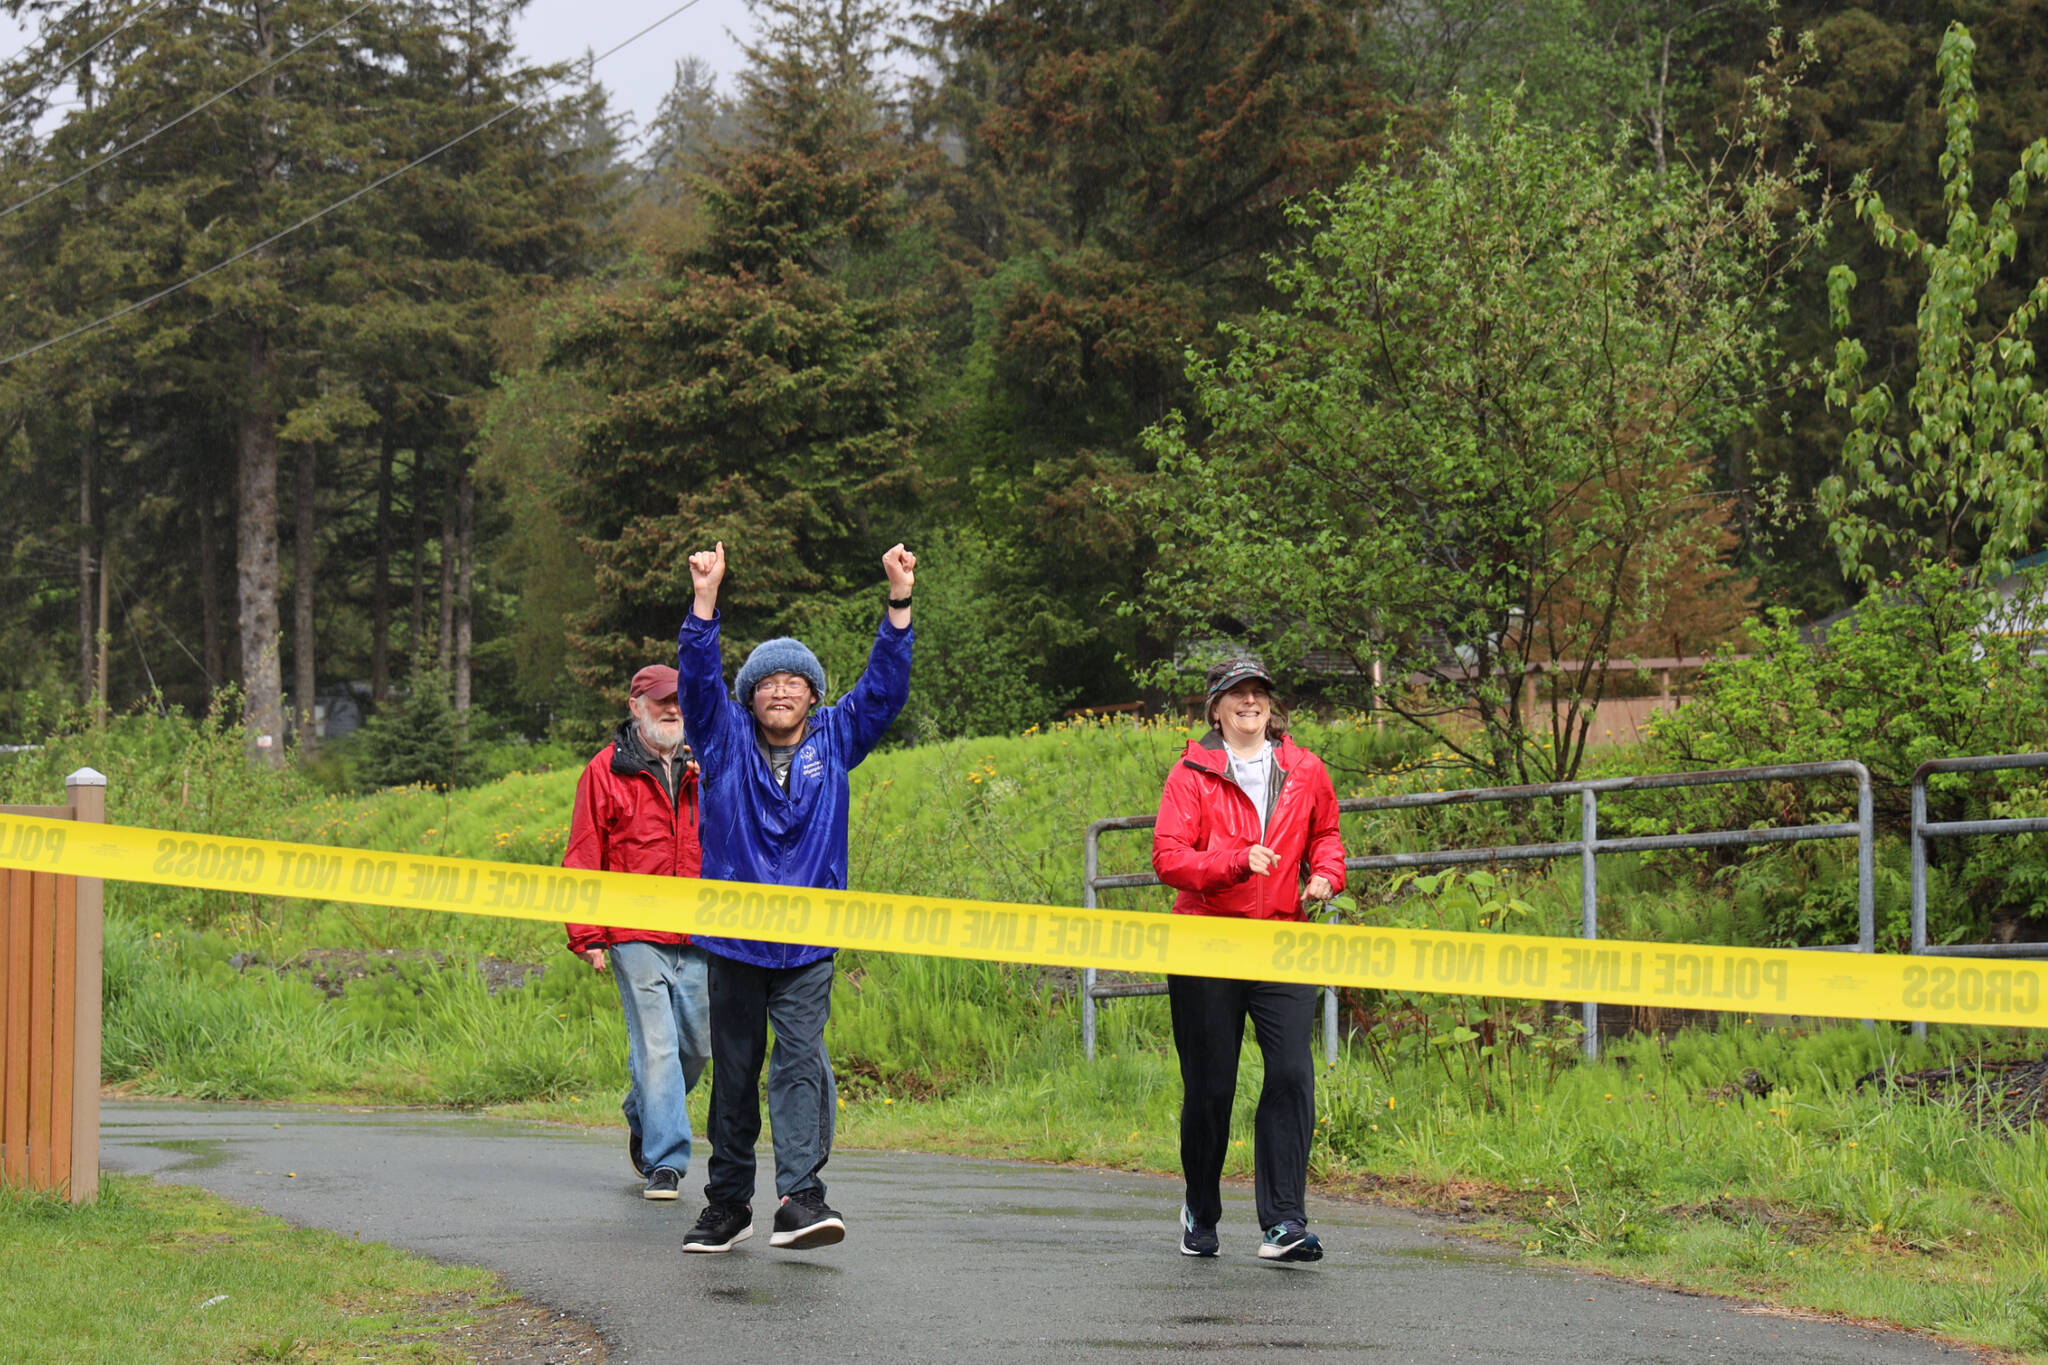 Fu Bao Hartle celebrates before crossing the finish line alongside Clare Pavia during the Alaska Law Enforcement Torch Run at Twin Lakes Park Saturday morning. (Clarise Larson / Juneau Empire)